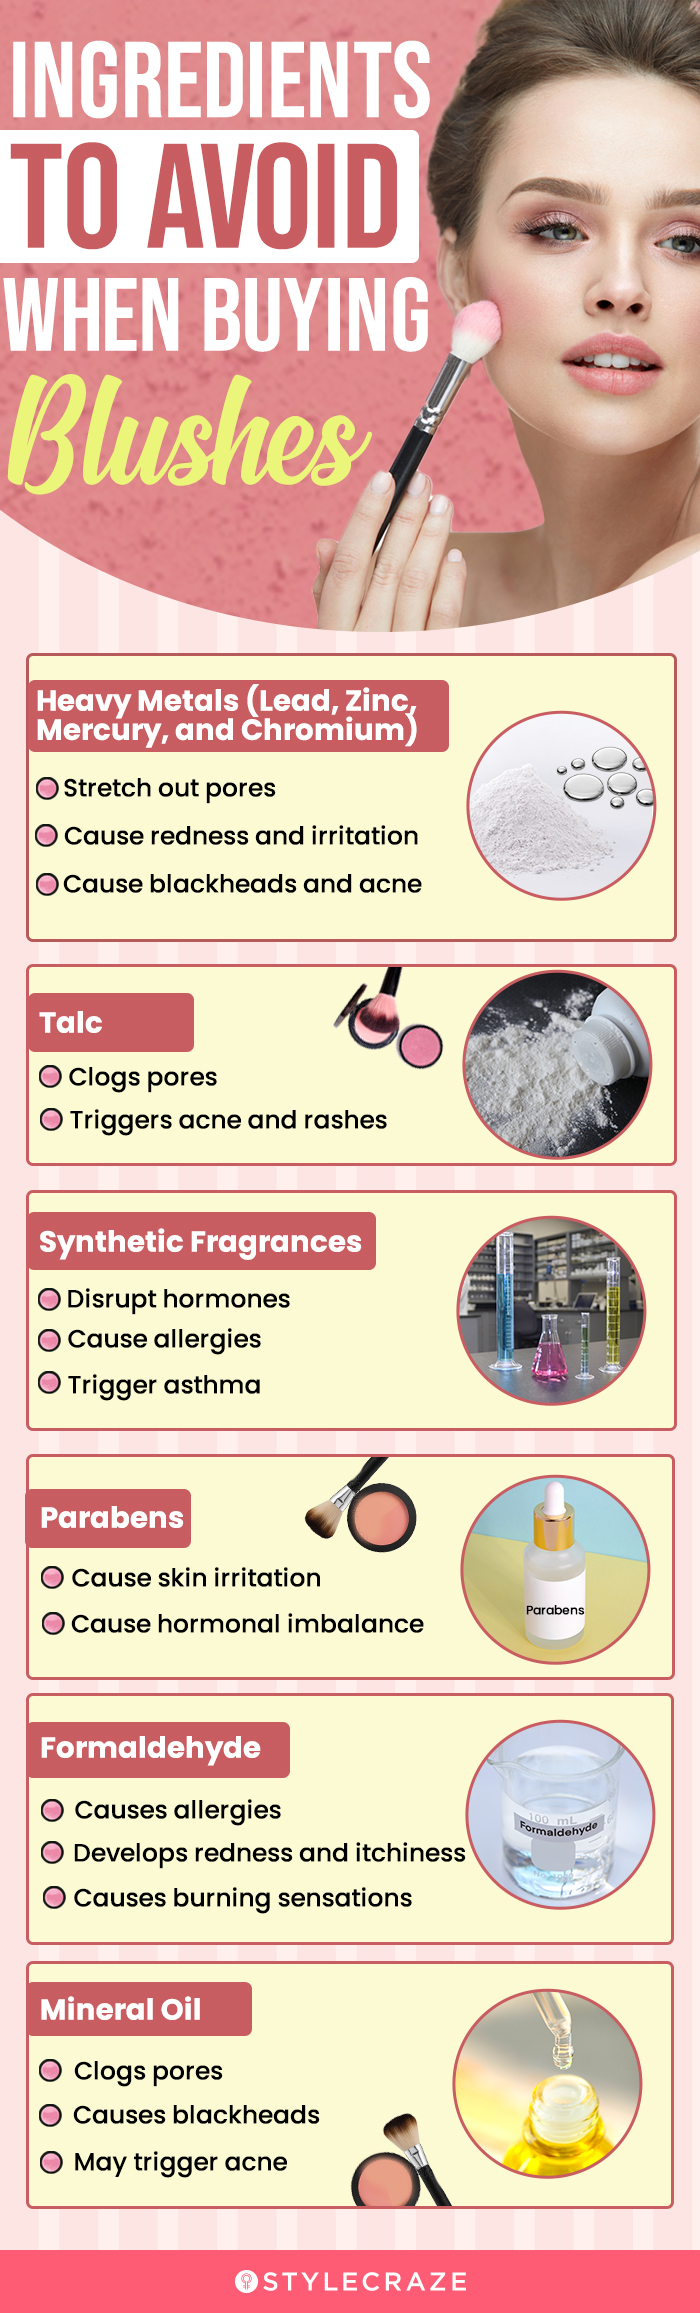 Ingredients To Avoid When Buying Blush (infographic)